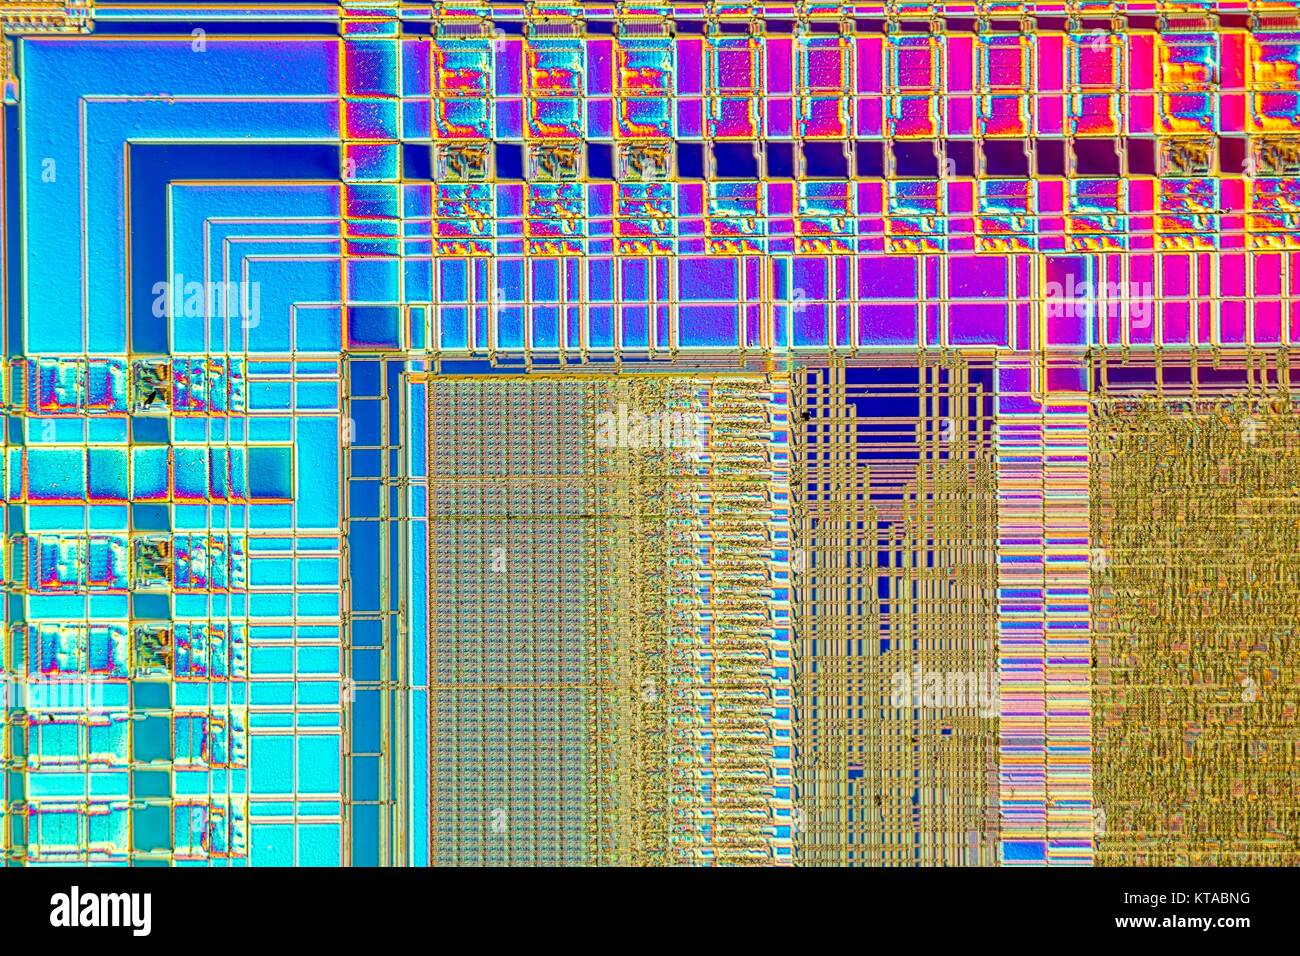 Light micrograph of a detail of a RAM computer memory chip. RAM is a type of computer memory that can be accessed randomly; that is, any byte of memory can be accessed without touching the preceding bytes.This is the most common type of memory found in personal computers and different other electronic devices like cellular phones, usb sticks and printers. Objcet size of this section approx. 1.2 mm across. Stock Photo